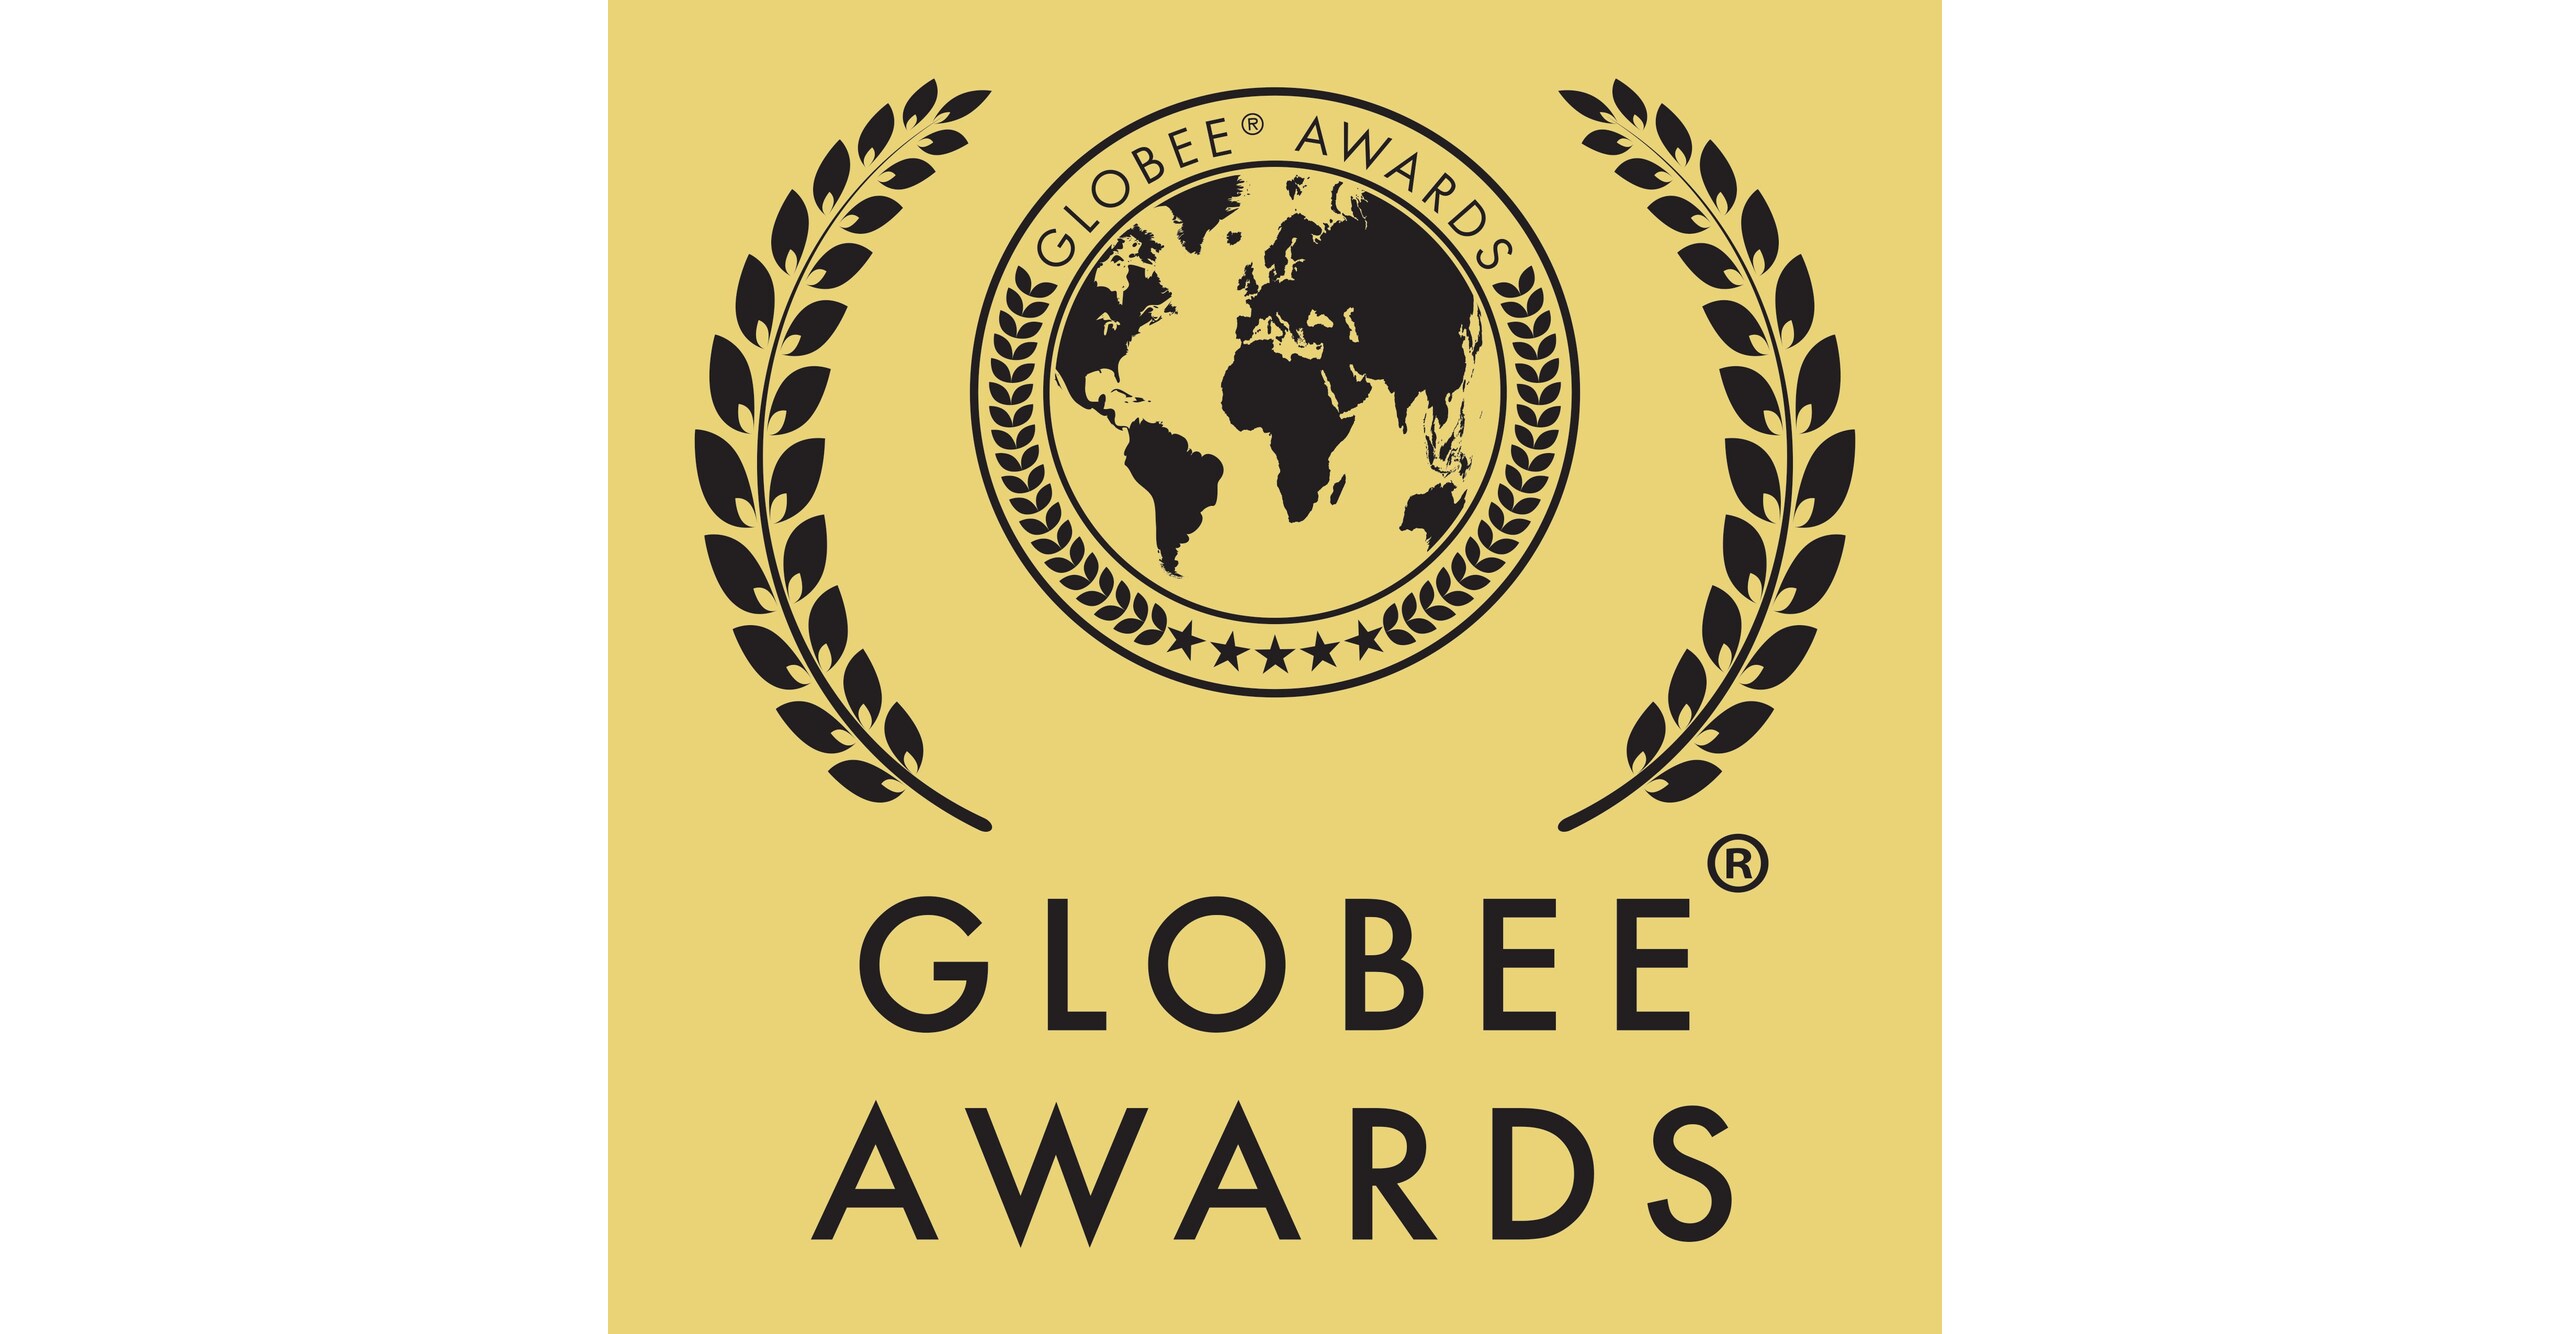 Globee® Awards Invitations Entries for Artificial Intelligence Achievements from All Greater than the Planet